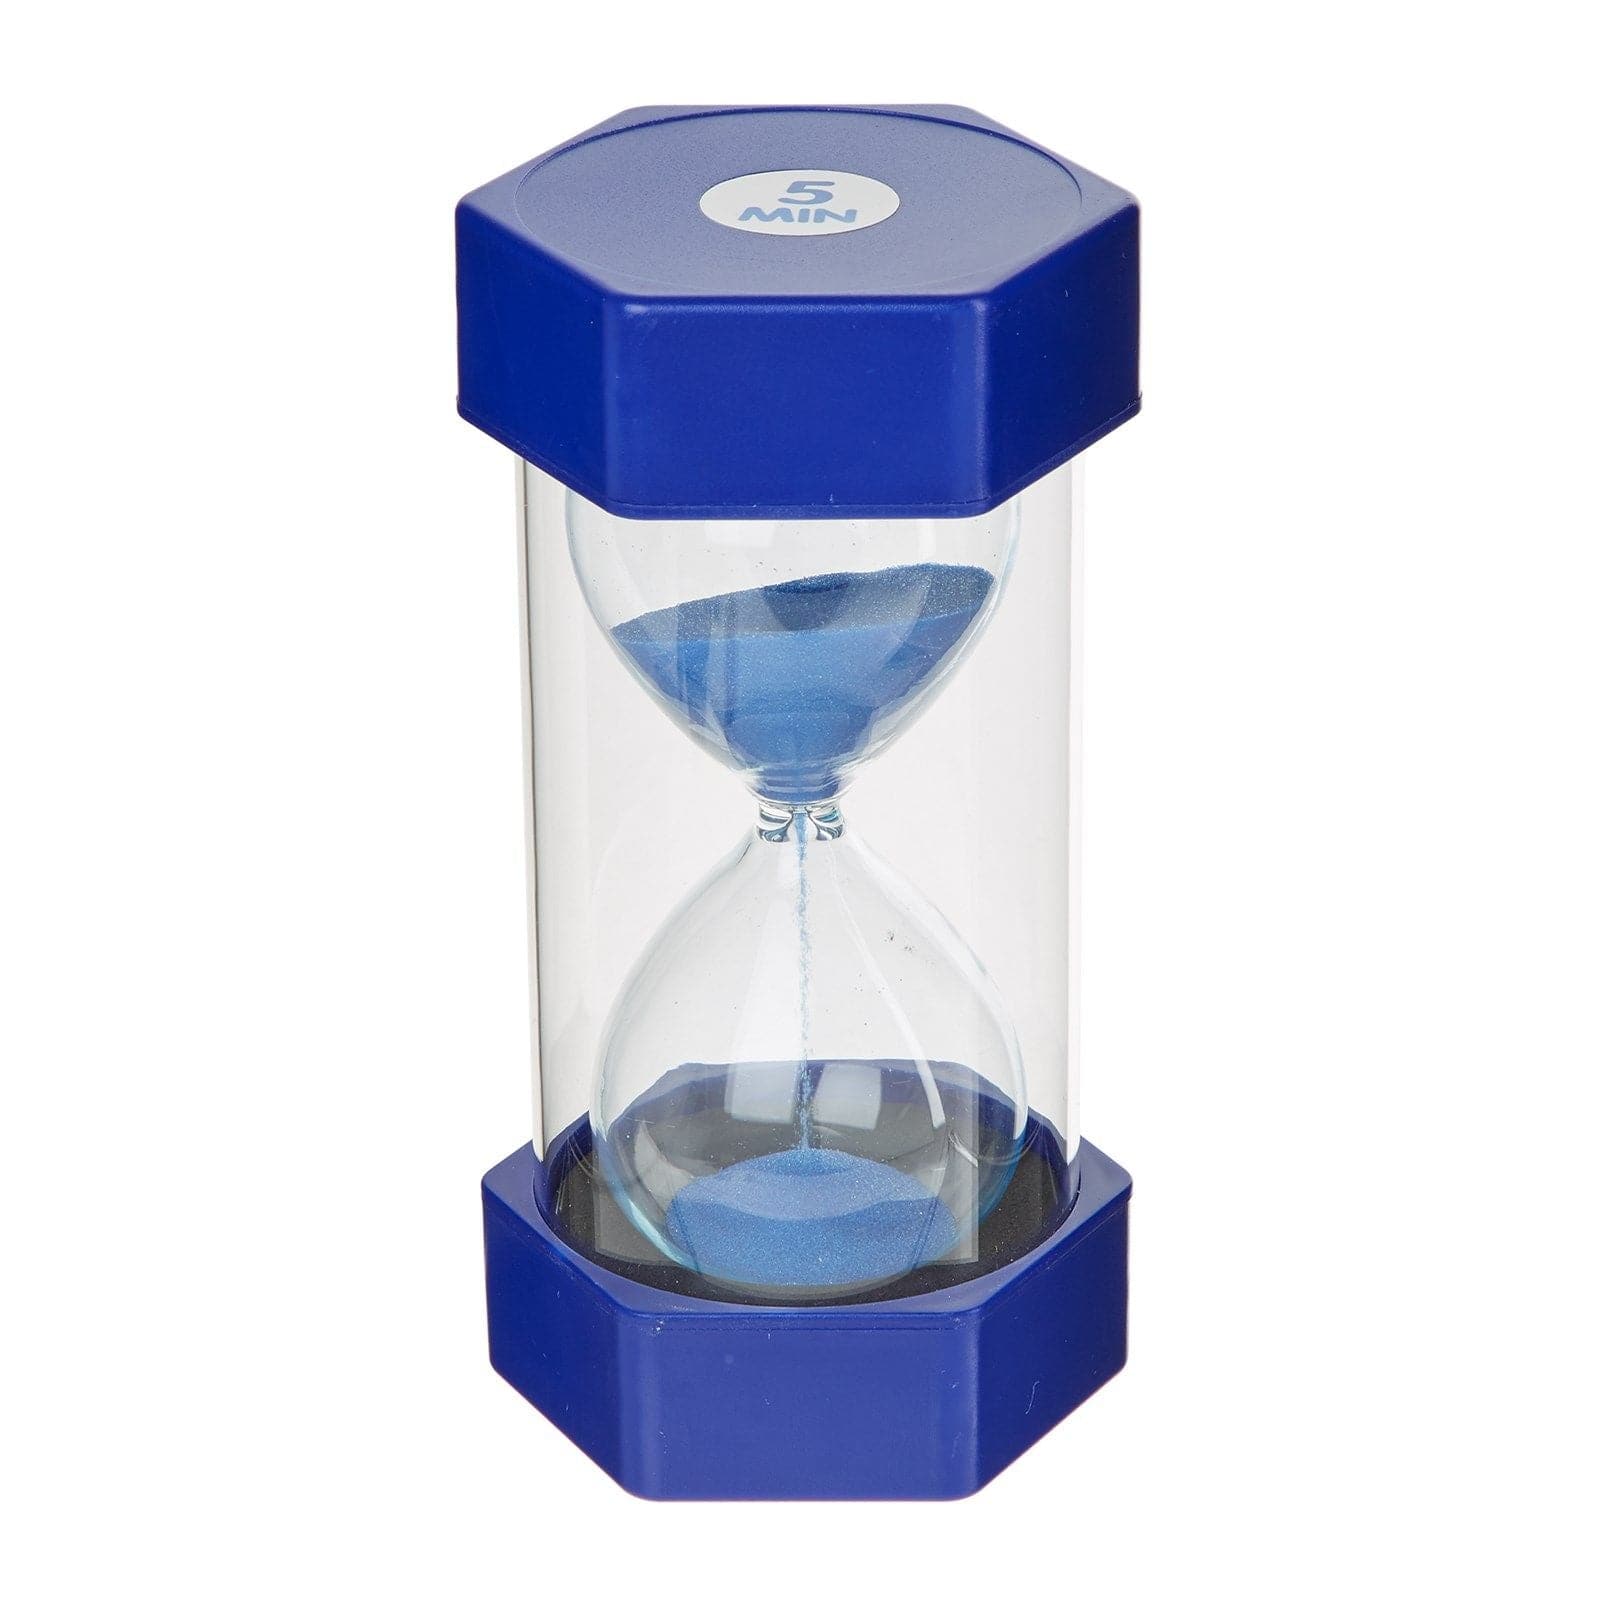 5 minute Sand Timer, The 5 minute Sand Timer is an impressive 160mm tall and has a durable design,this large 5 minute sand timer is an excellent resource for the early years setting. The 5 minute Sand Timer has giant proportions and clear colourful sand particles so that young children can time events, time themselves and set themselves time limits. The 5 minute Sand Timer is perfect for use in games, activities, and experiments, this heavy-duty 5 minute sand timer is surrounded by thick walls with molded e